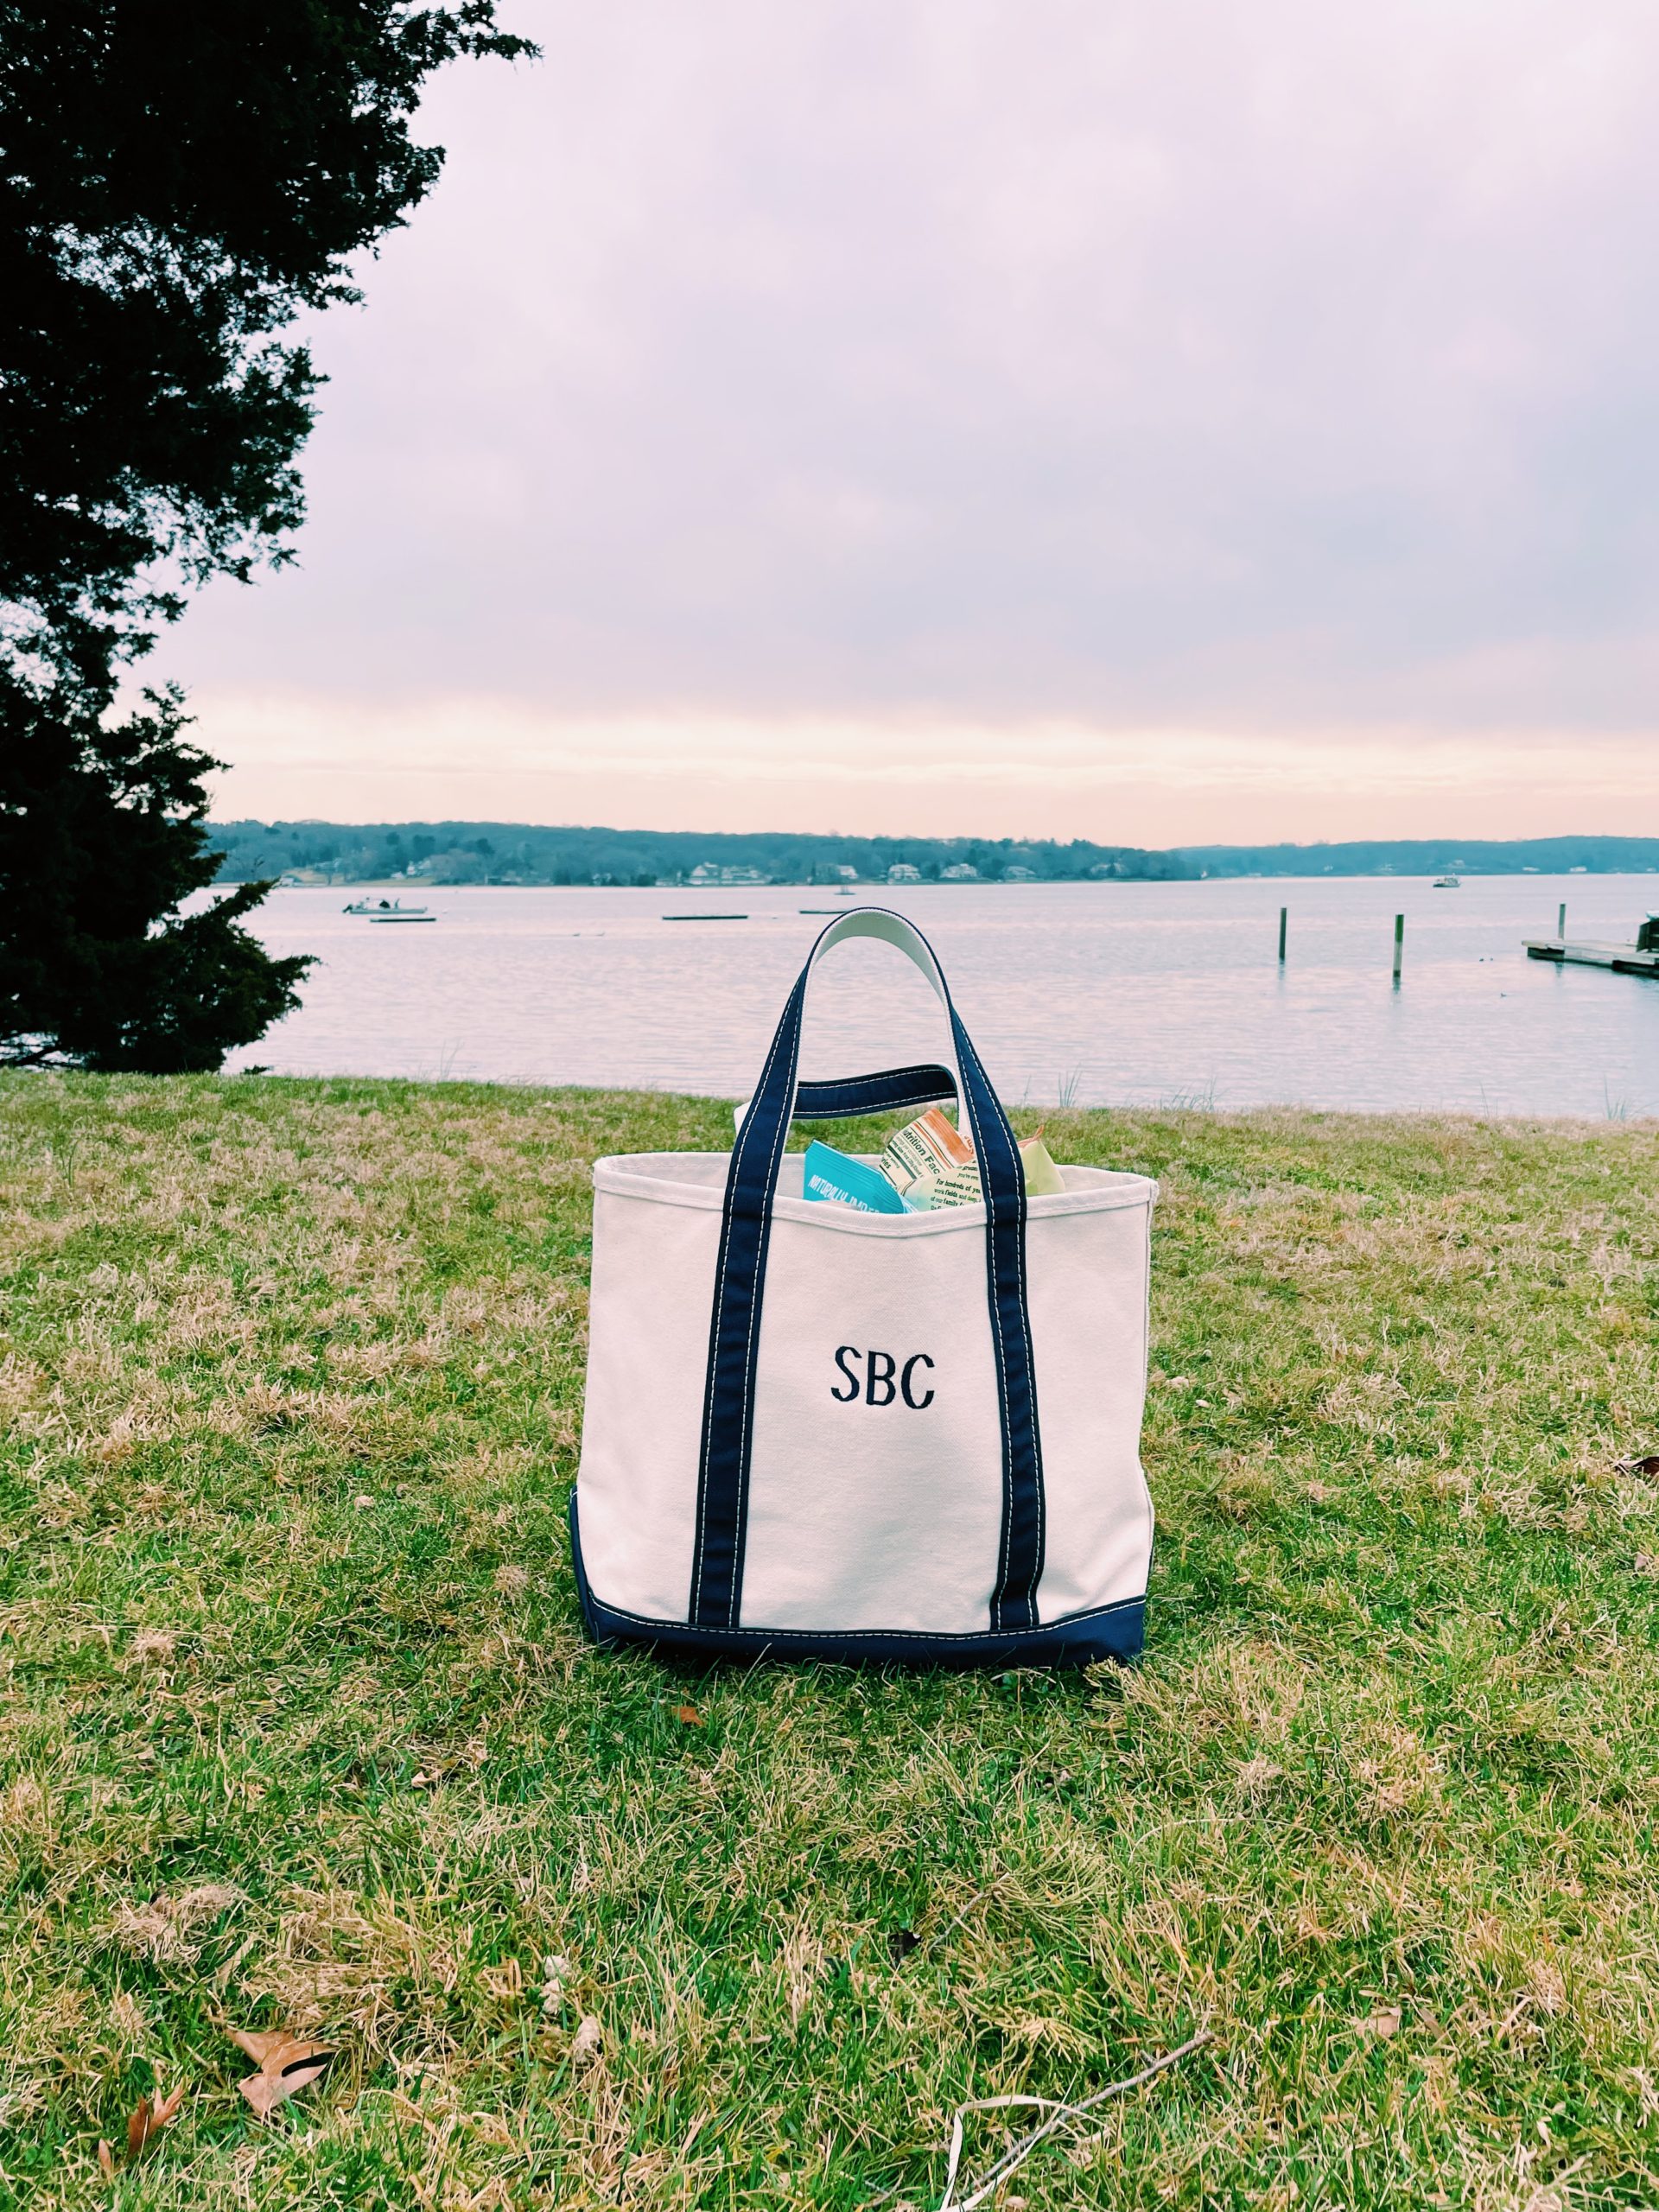 Salt Water New England: L.L. Bean Boat and Tote Bags - The Complete Guide